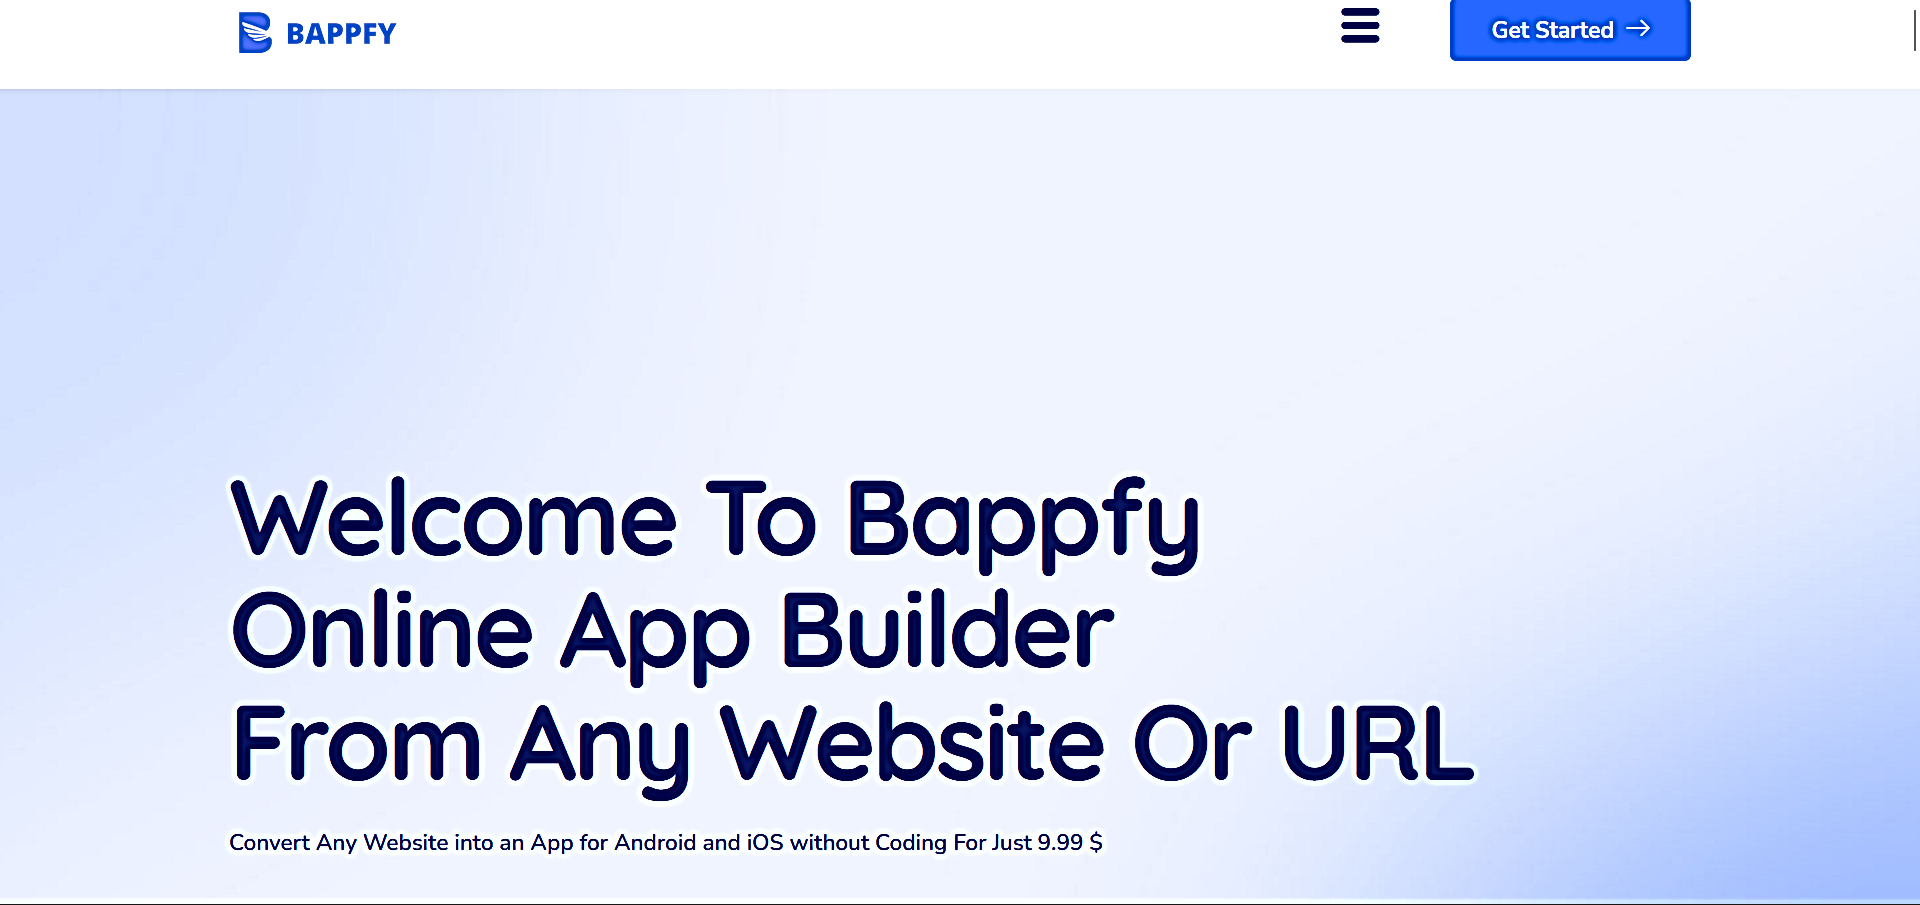 Bappfy featured